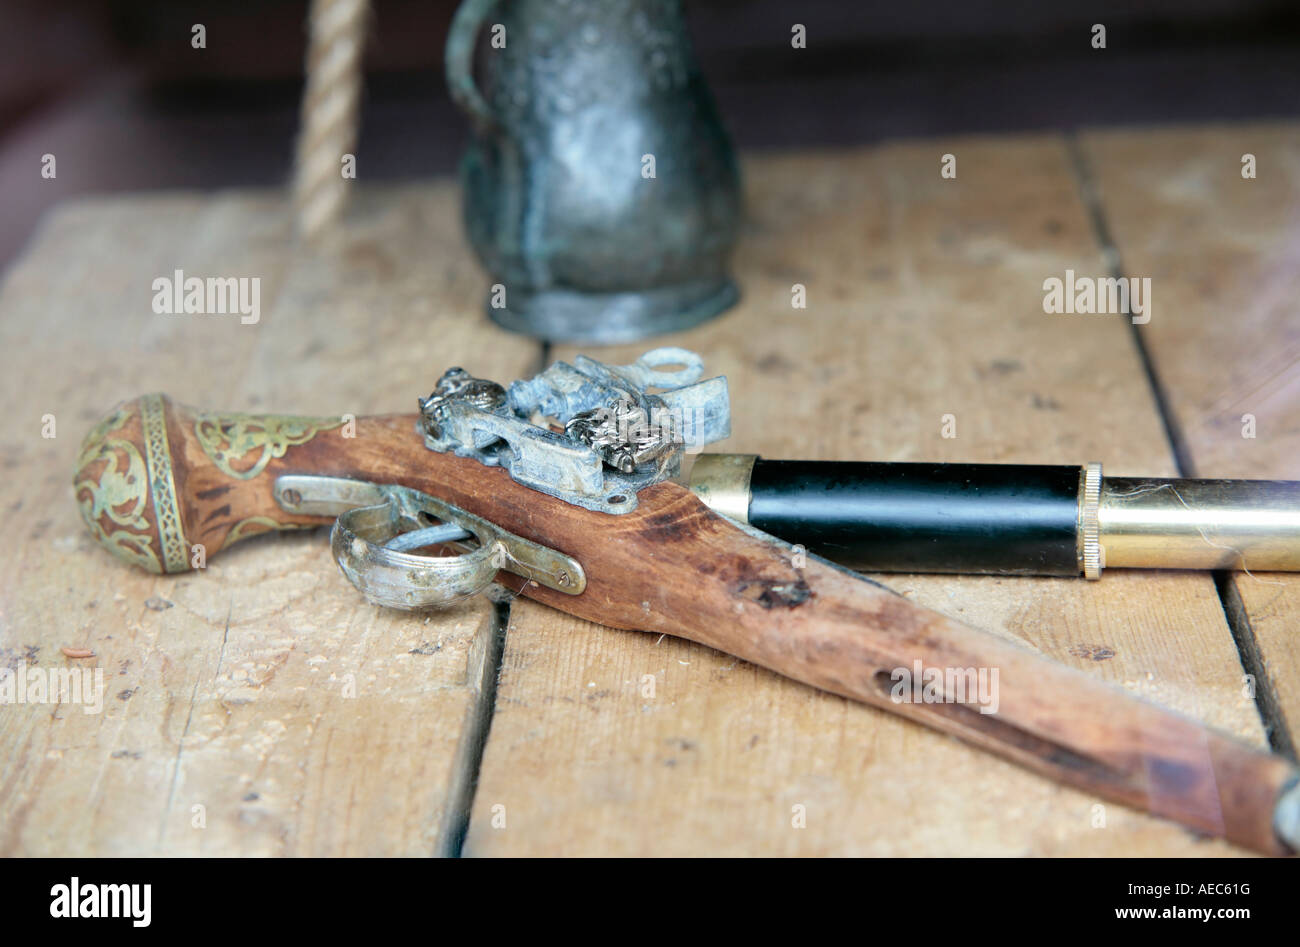 Fake wooden gun fashioned to look like a pirate's gun. Stock Photo